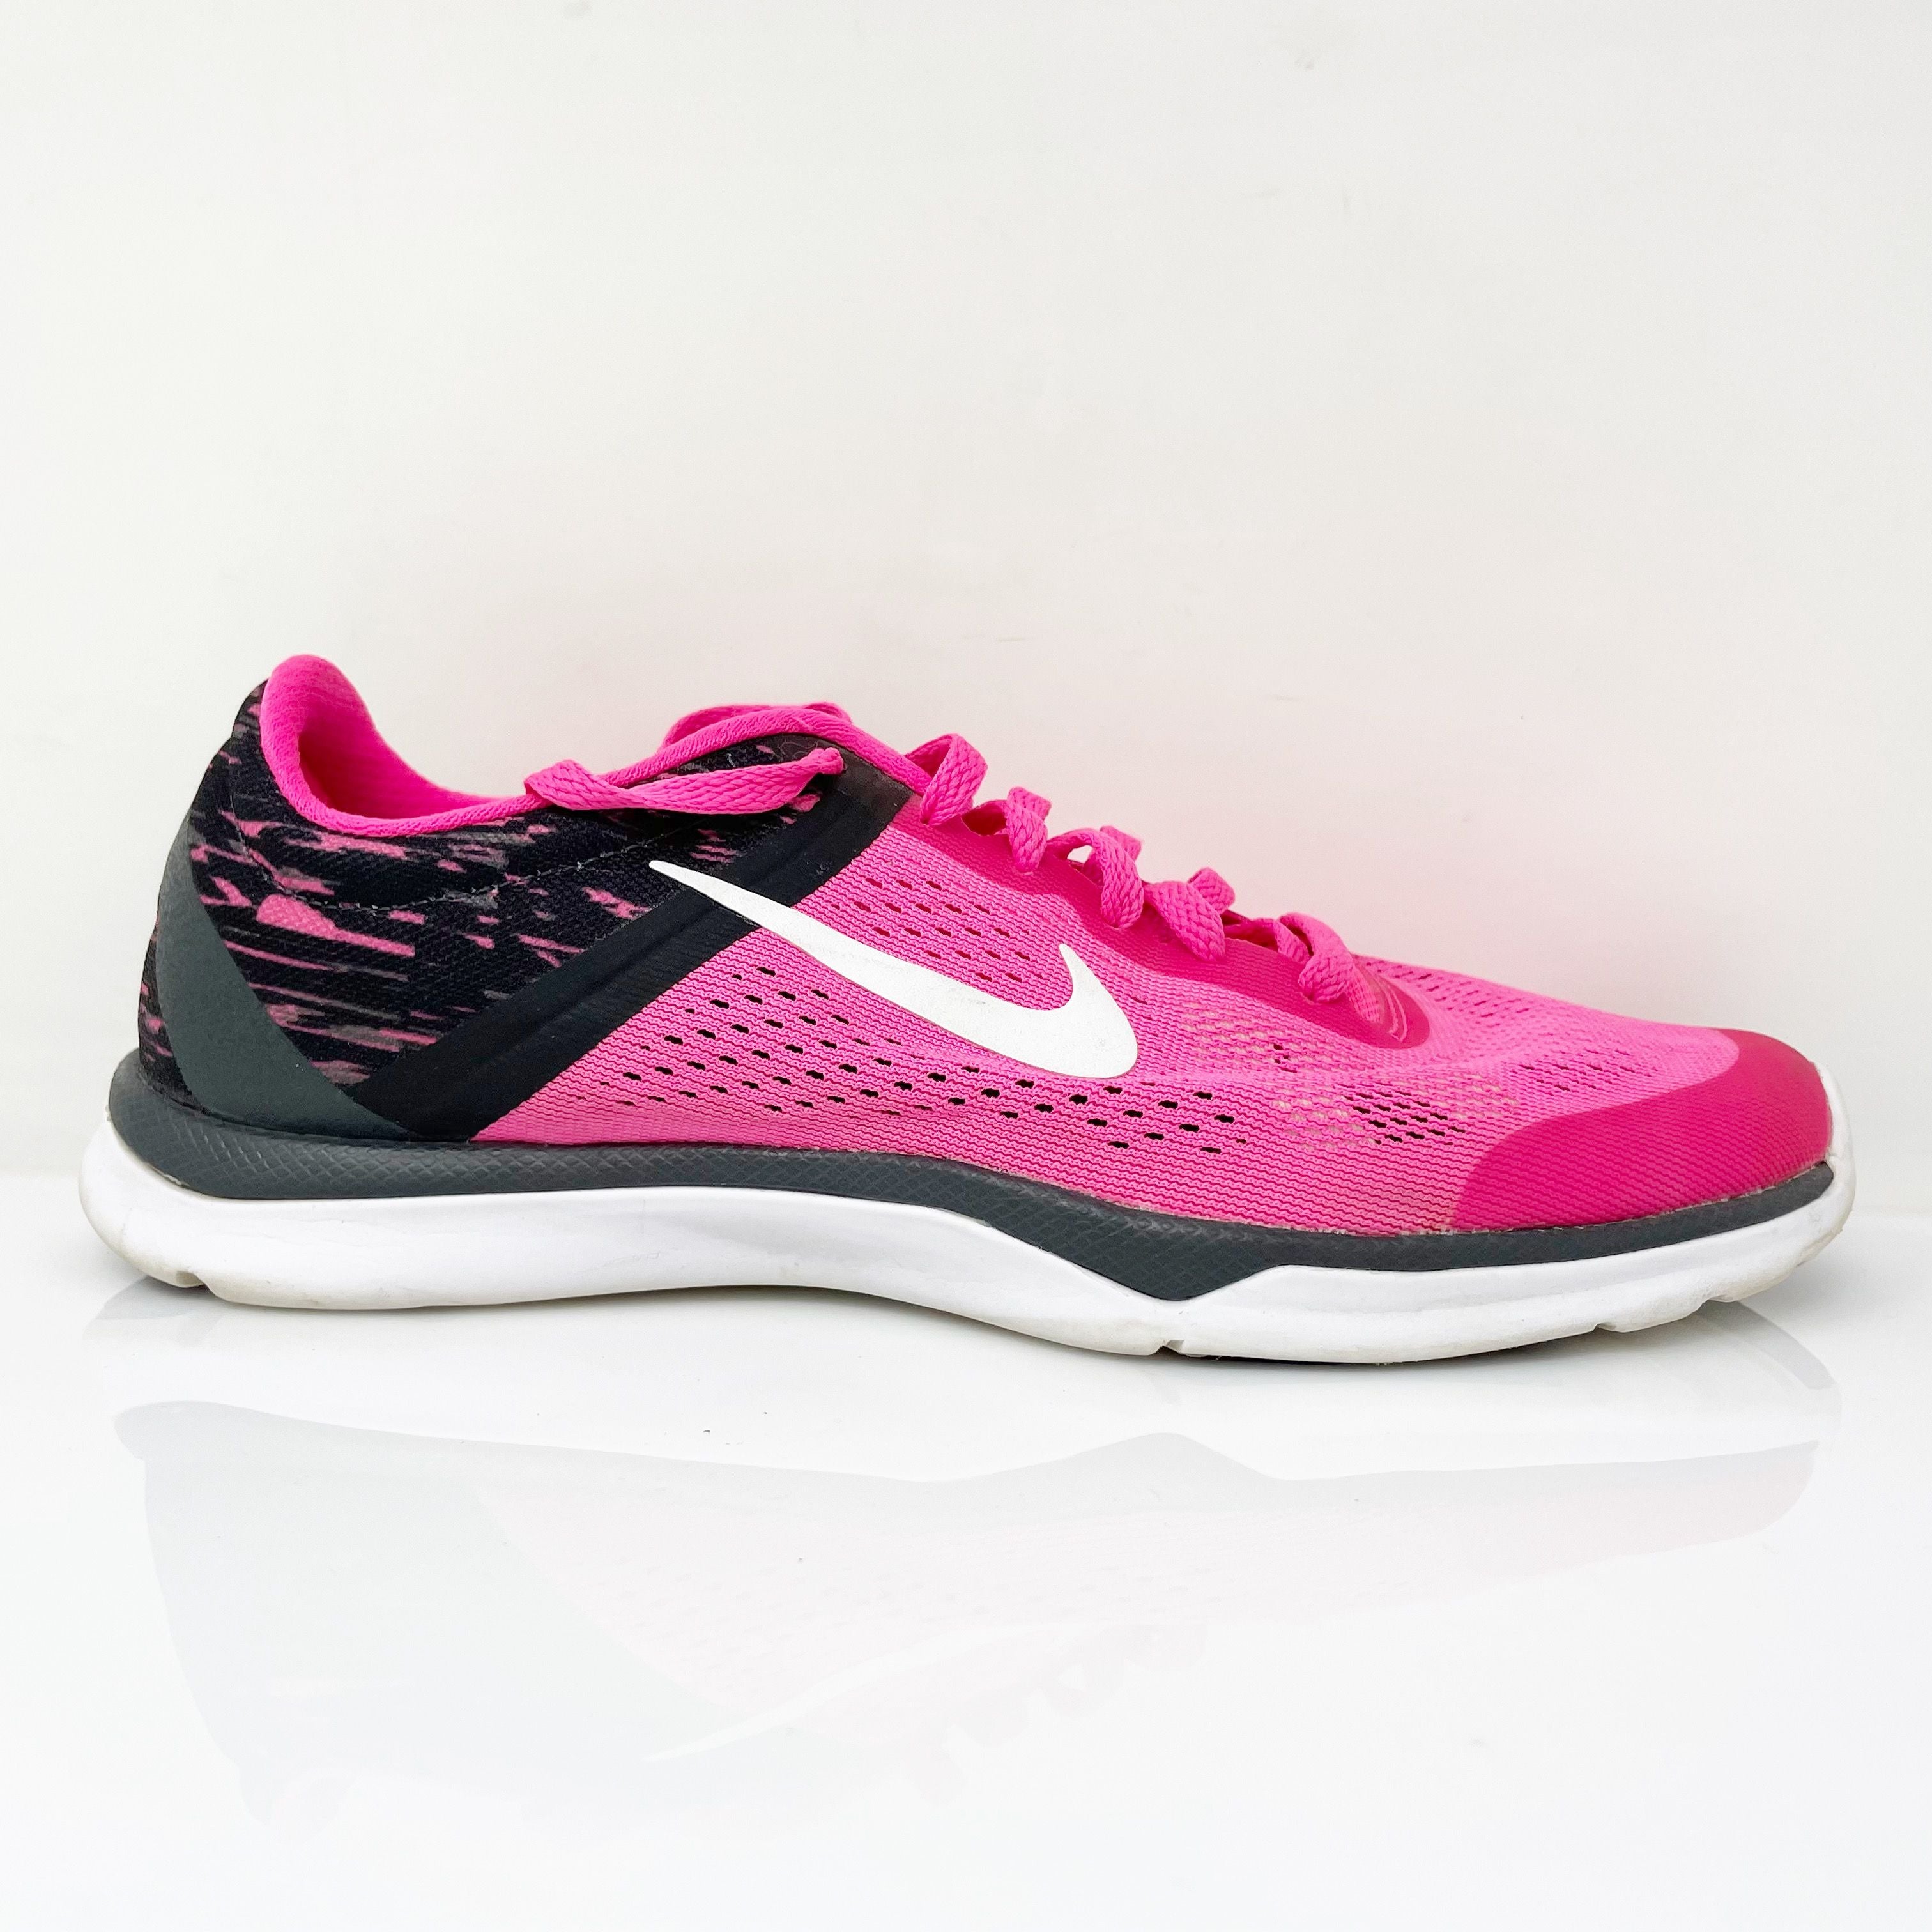 Nike Womens In Season TR 5 819033-600 Pink Running Shoes Sneakers Size ...